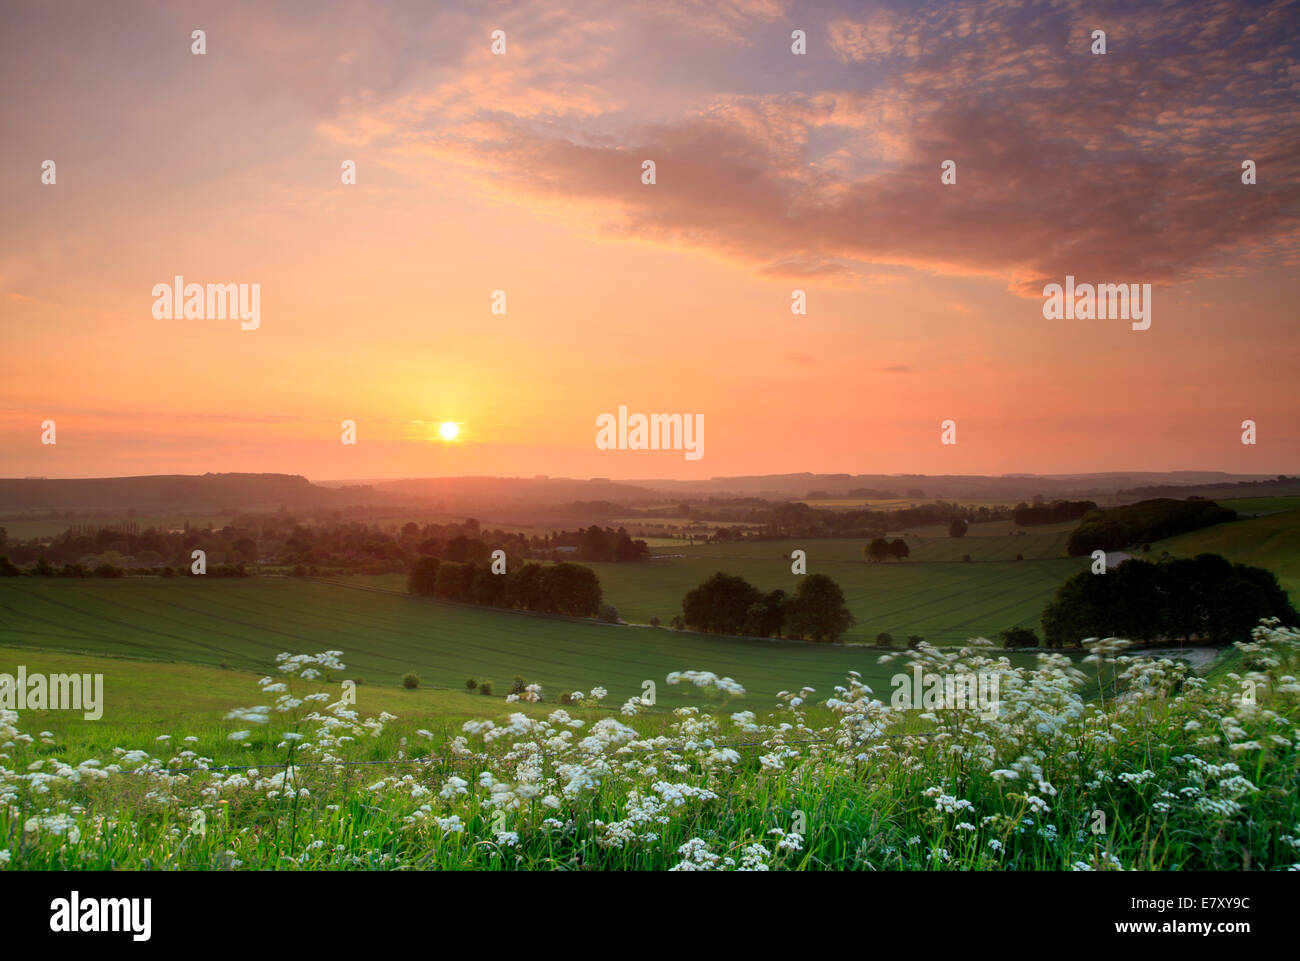 An early June sunrise at Whiten Hill, overlooking the Wylye Valley near Warminster in Wiltshire. Stock Photo